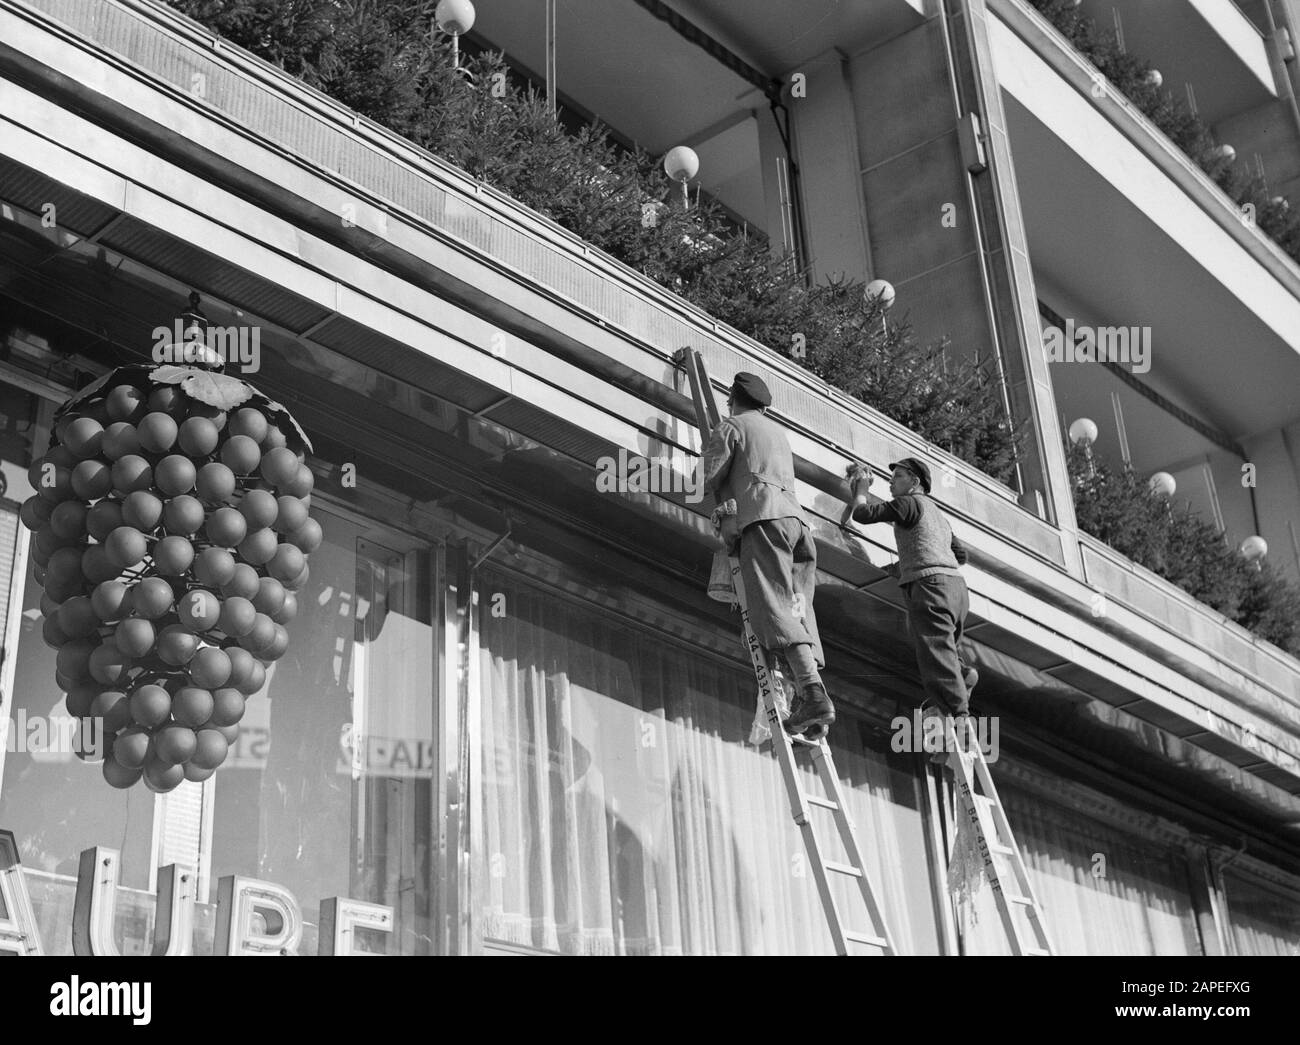 Reportage Berlin Description: Berlin. Painters at work on ladders against the facade of cafe Traube on the HardenbergstraÃe Date: November 1935 Location: Berlin, Germany Keywords: architecture, cafÃ©s, grapes, ladders, lamps, windows, advertising, painters, street images Stock Photo